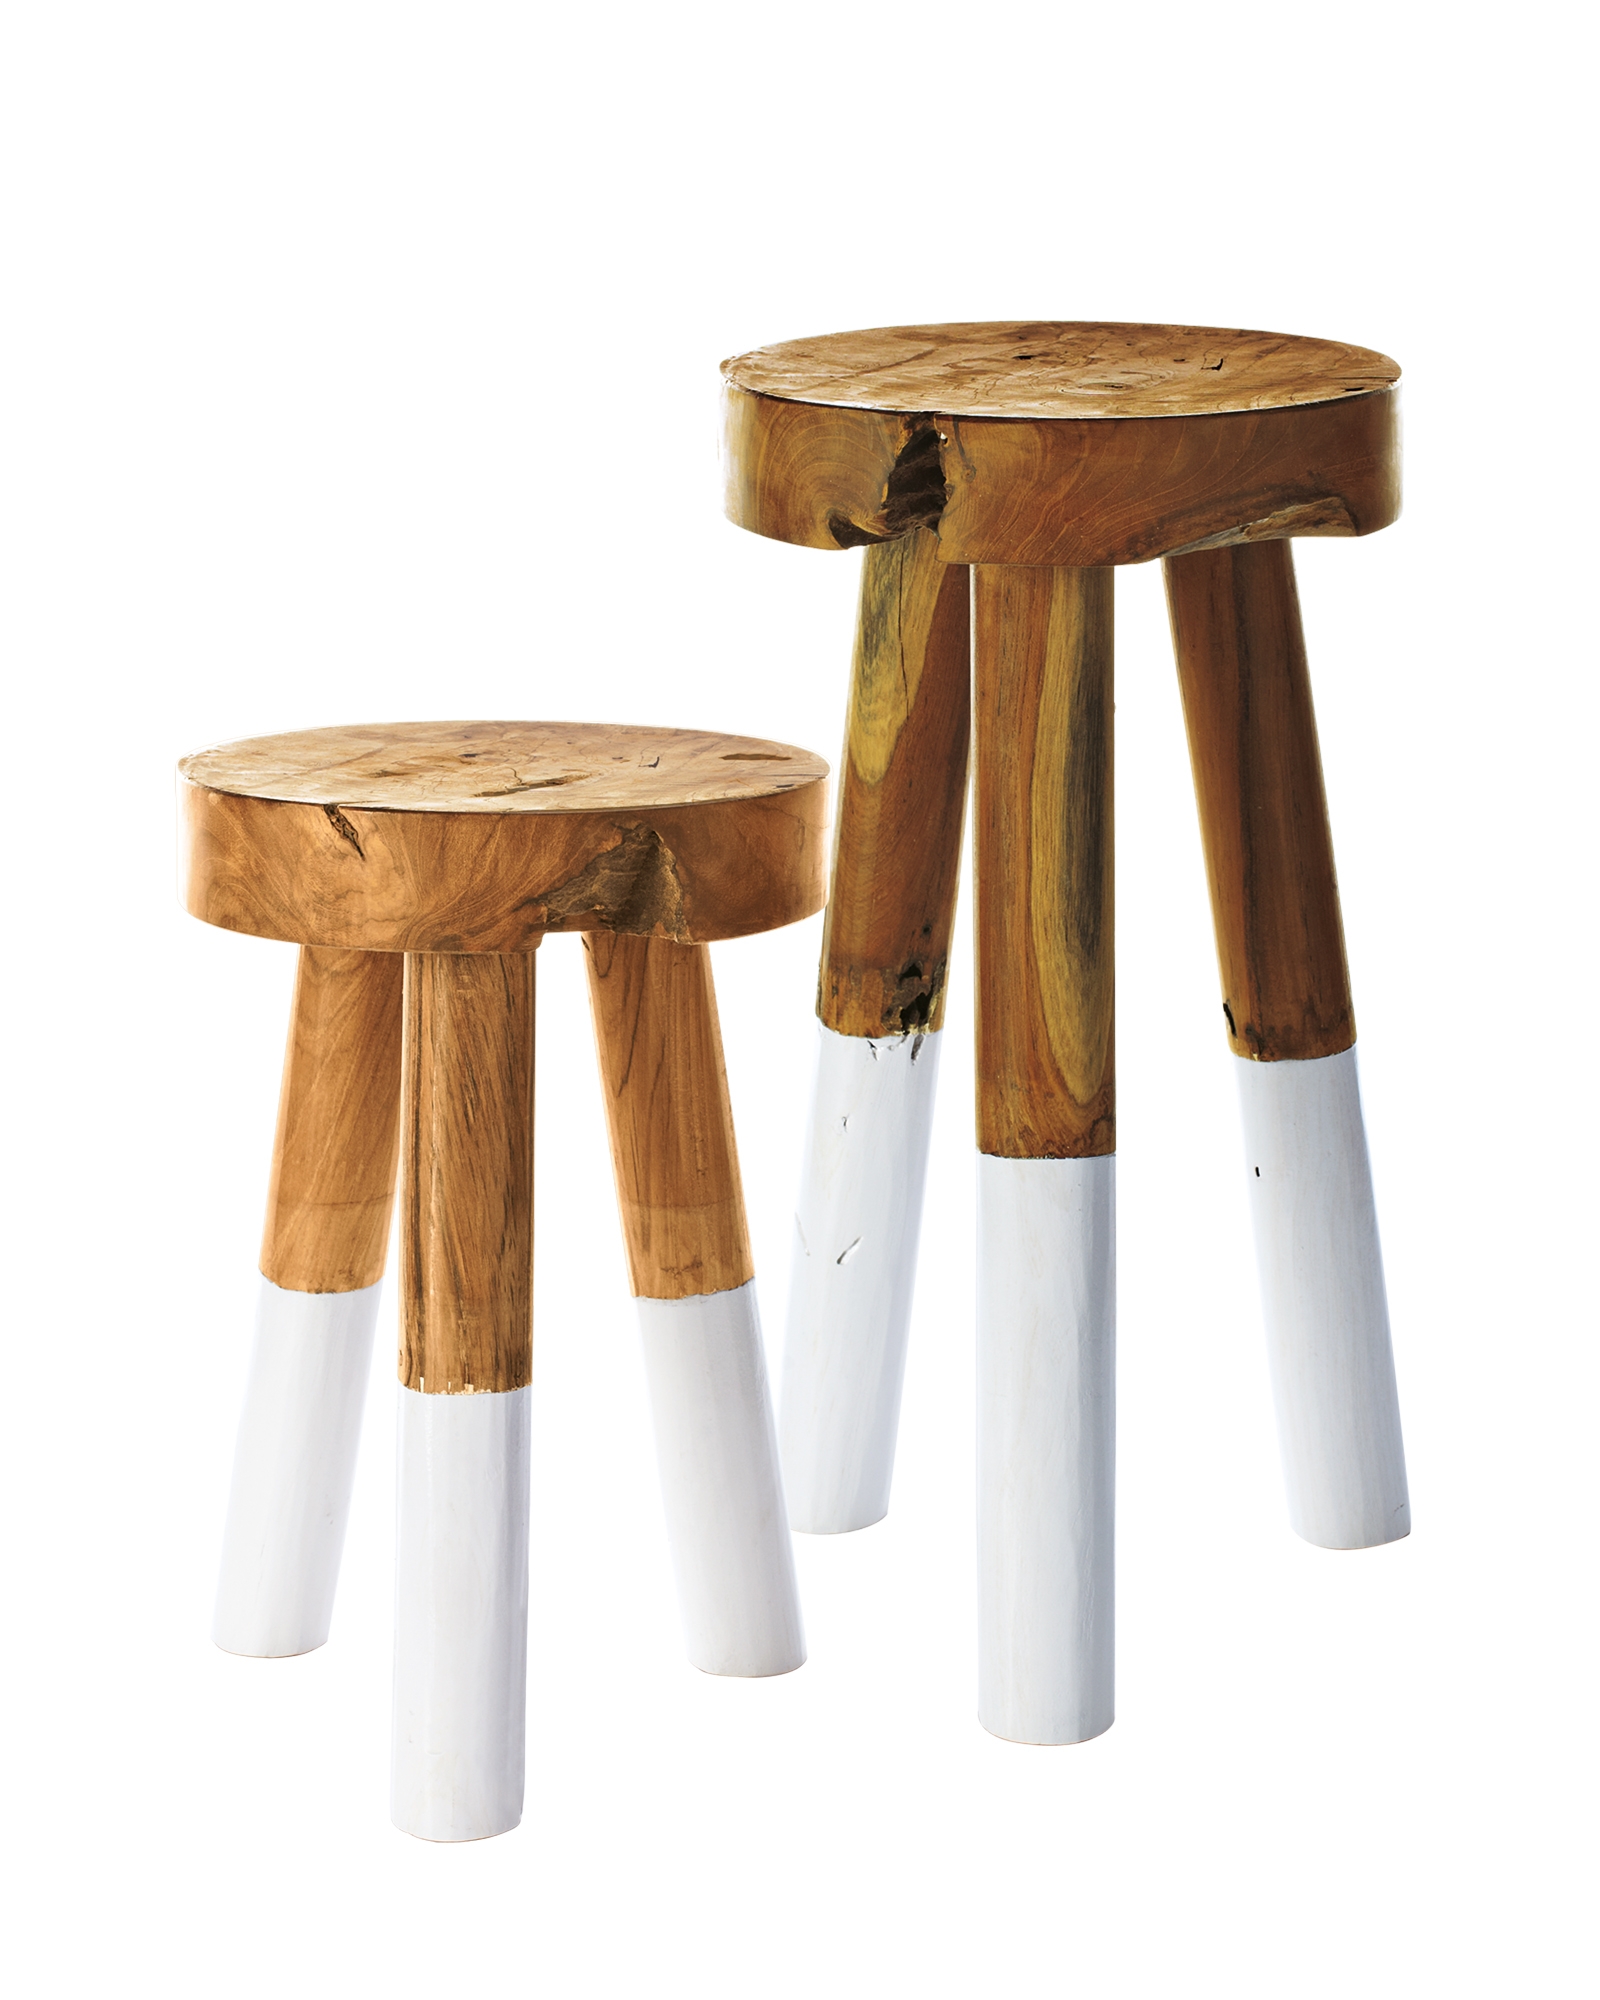 Dip-Dyed Stools - Small - Image 1